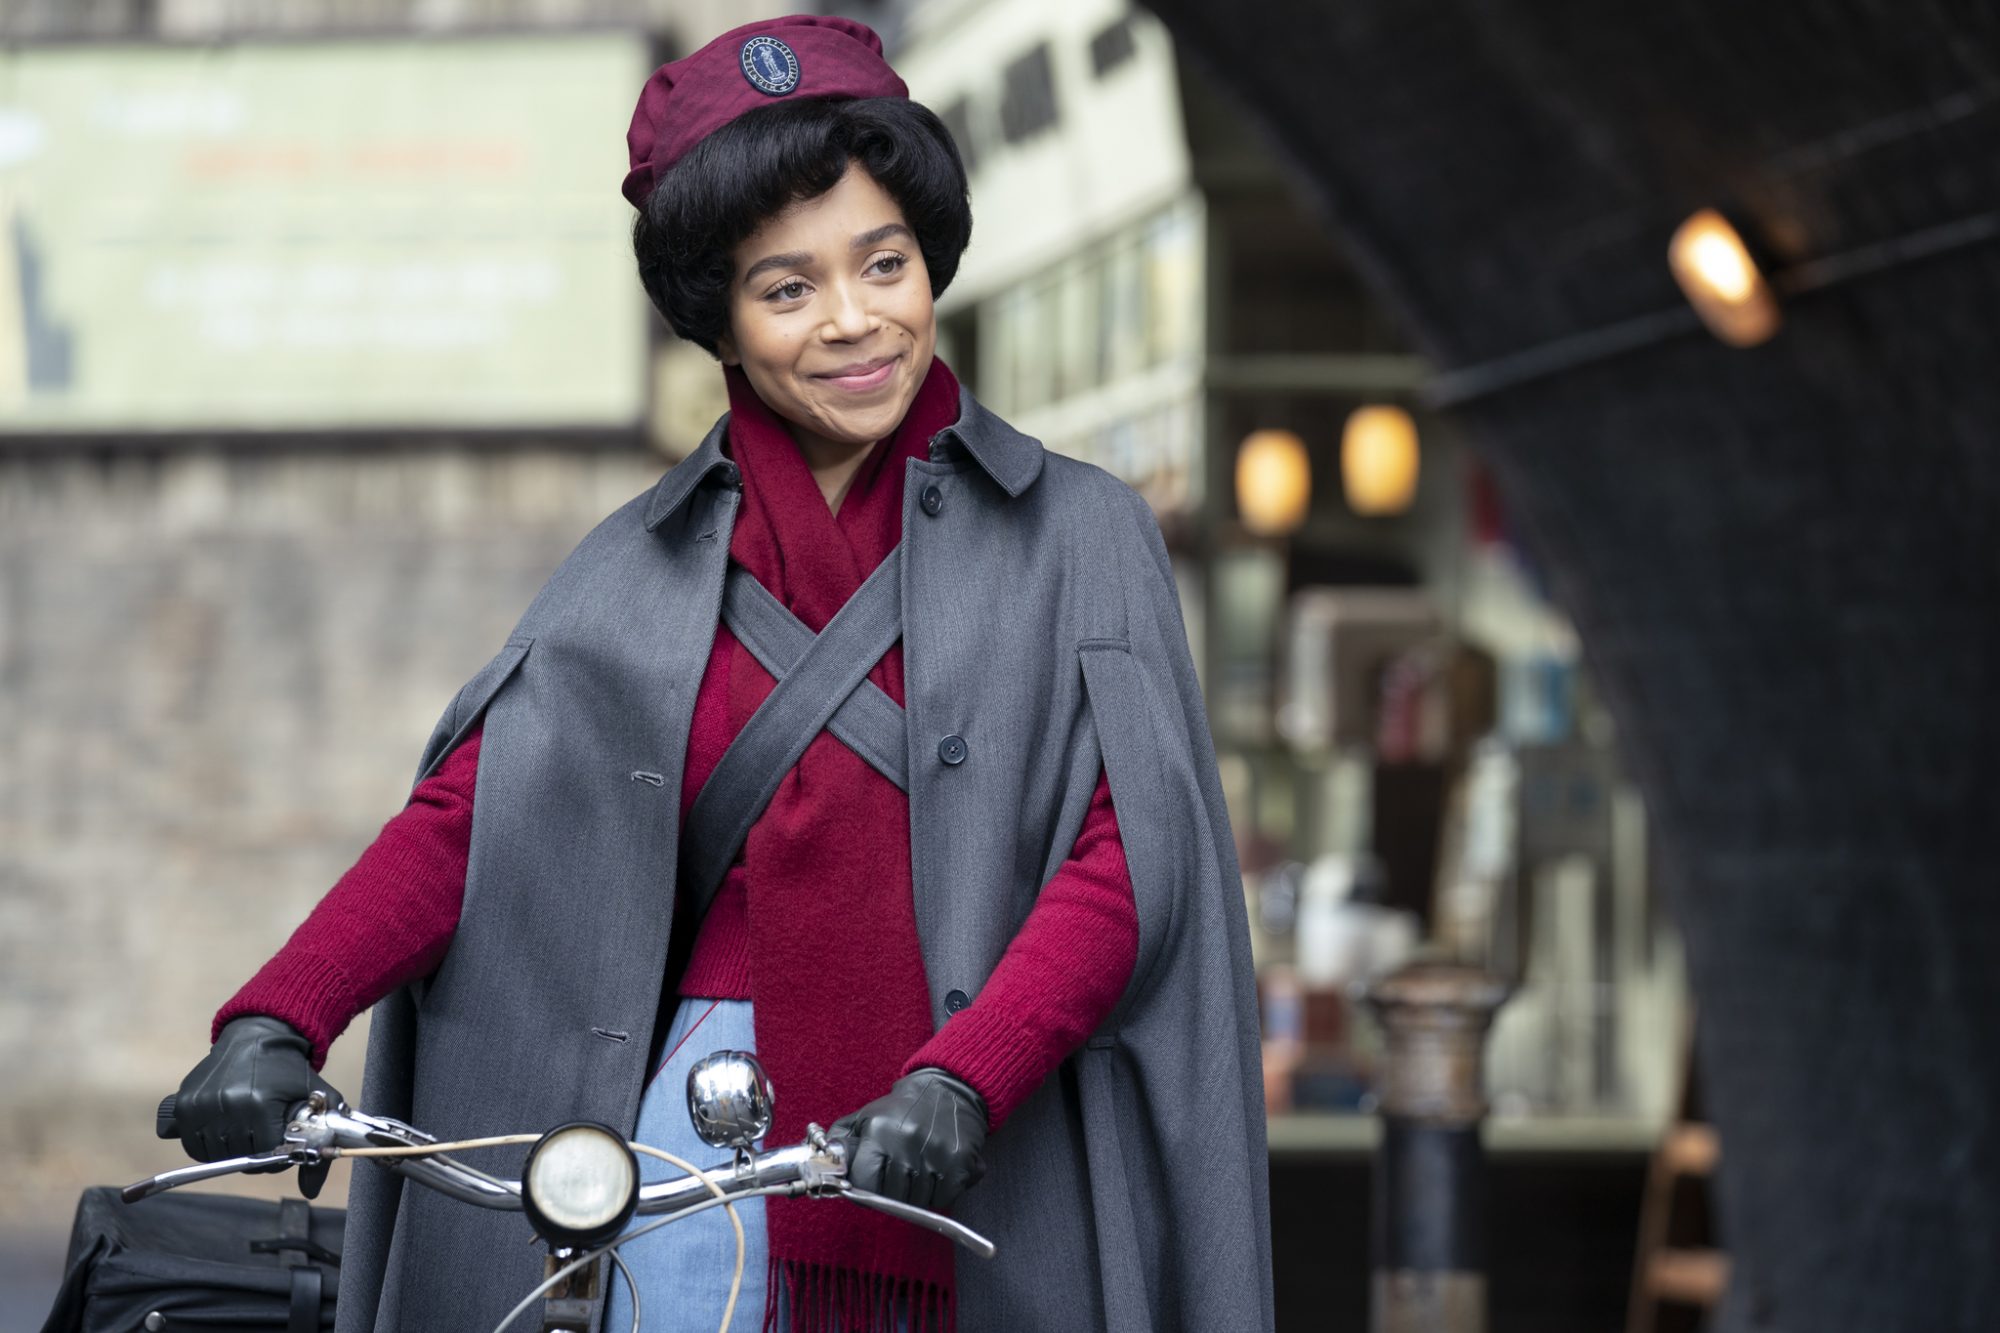 Call the Midwife: Seasons 12 13 BBC Drama Renewed for Two More Years